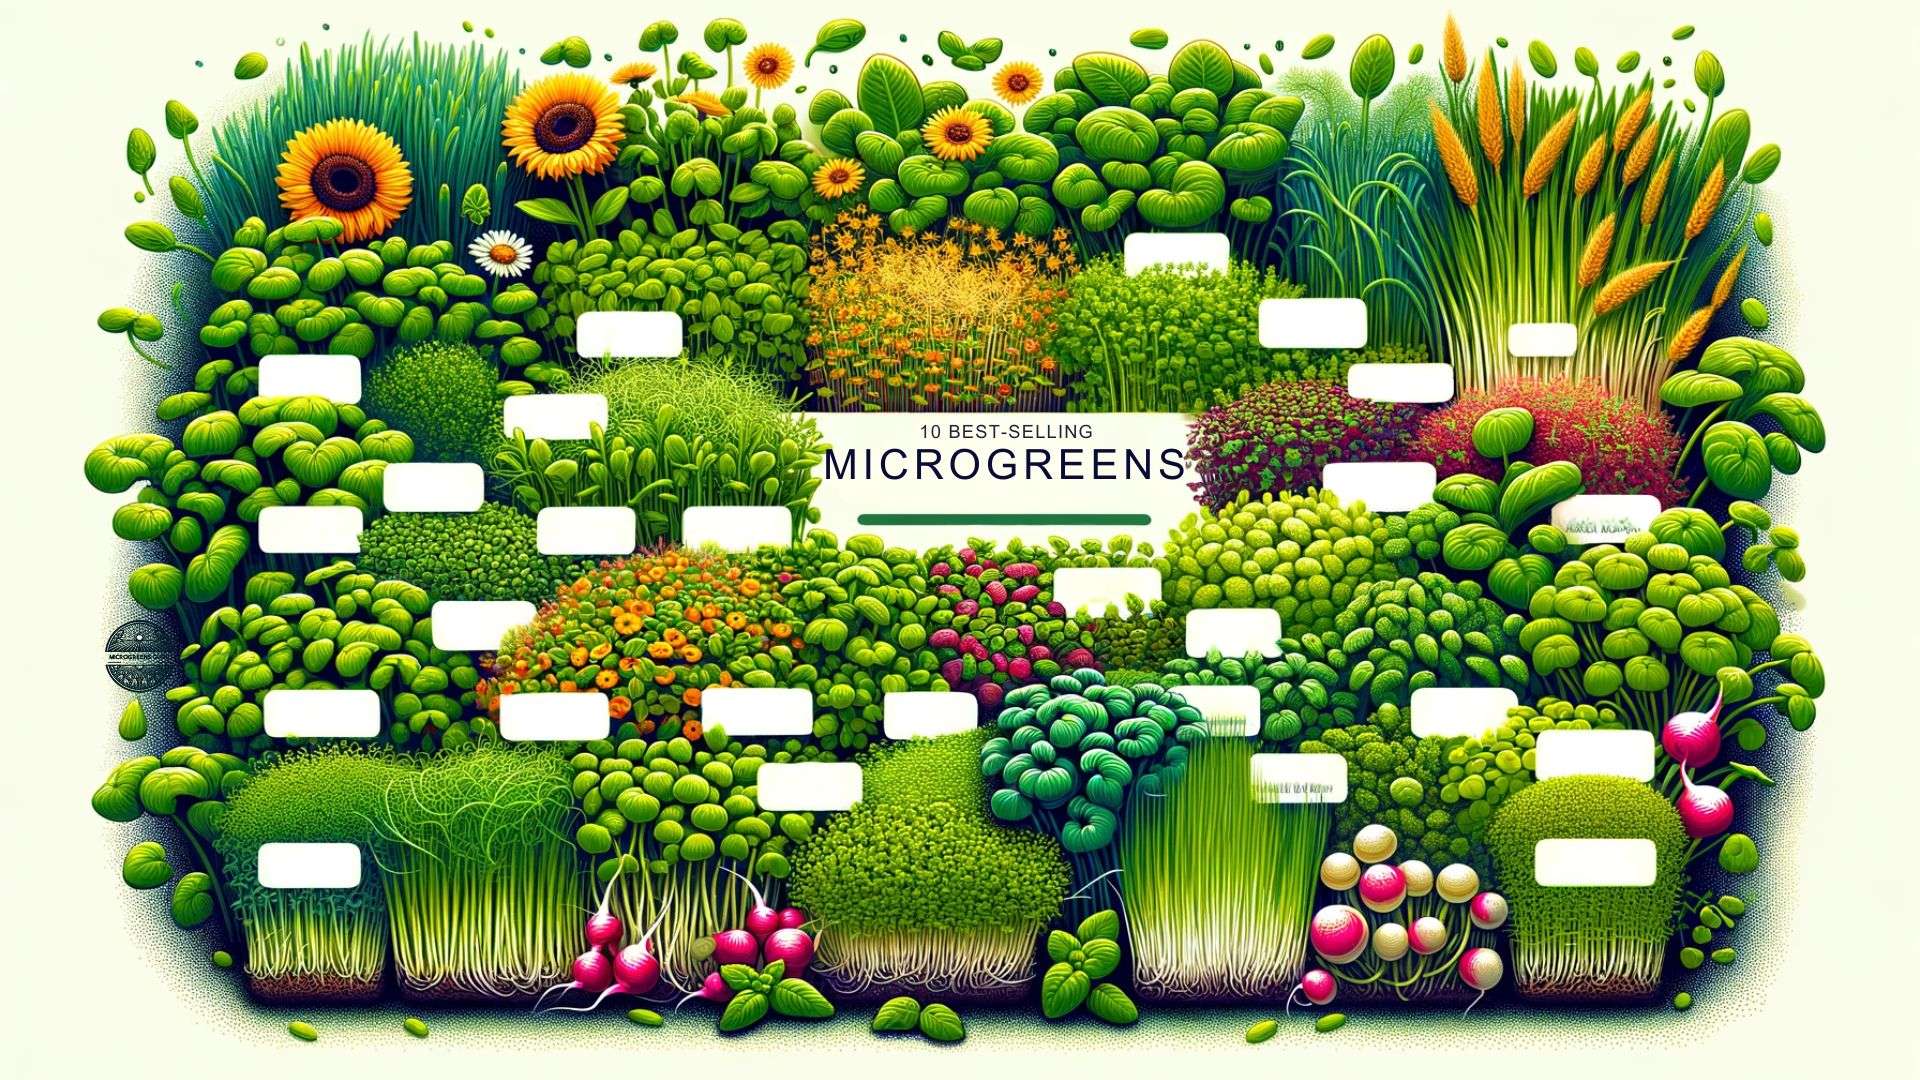 Check Out Our Guide to the 10 Best Seeling Microgreens